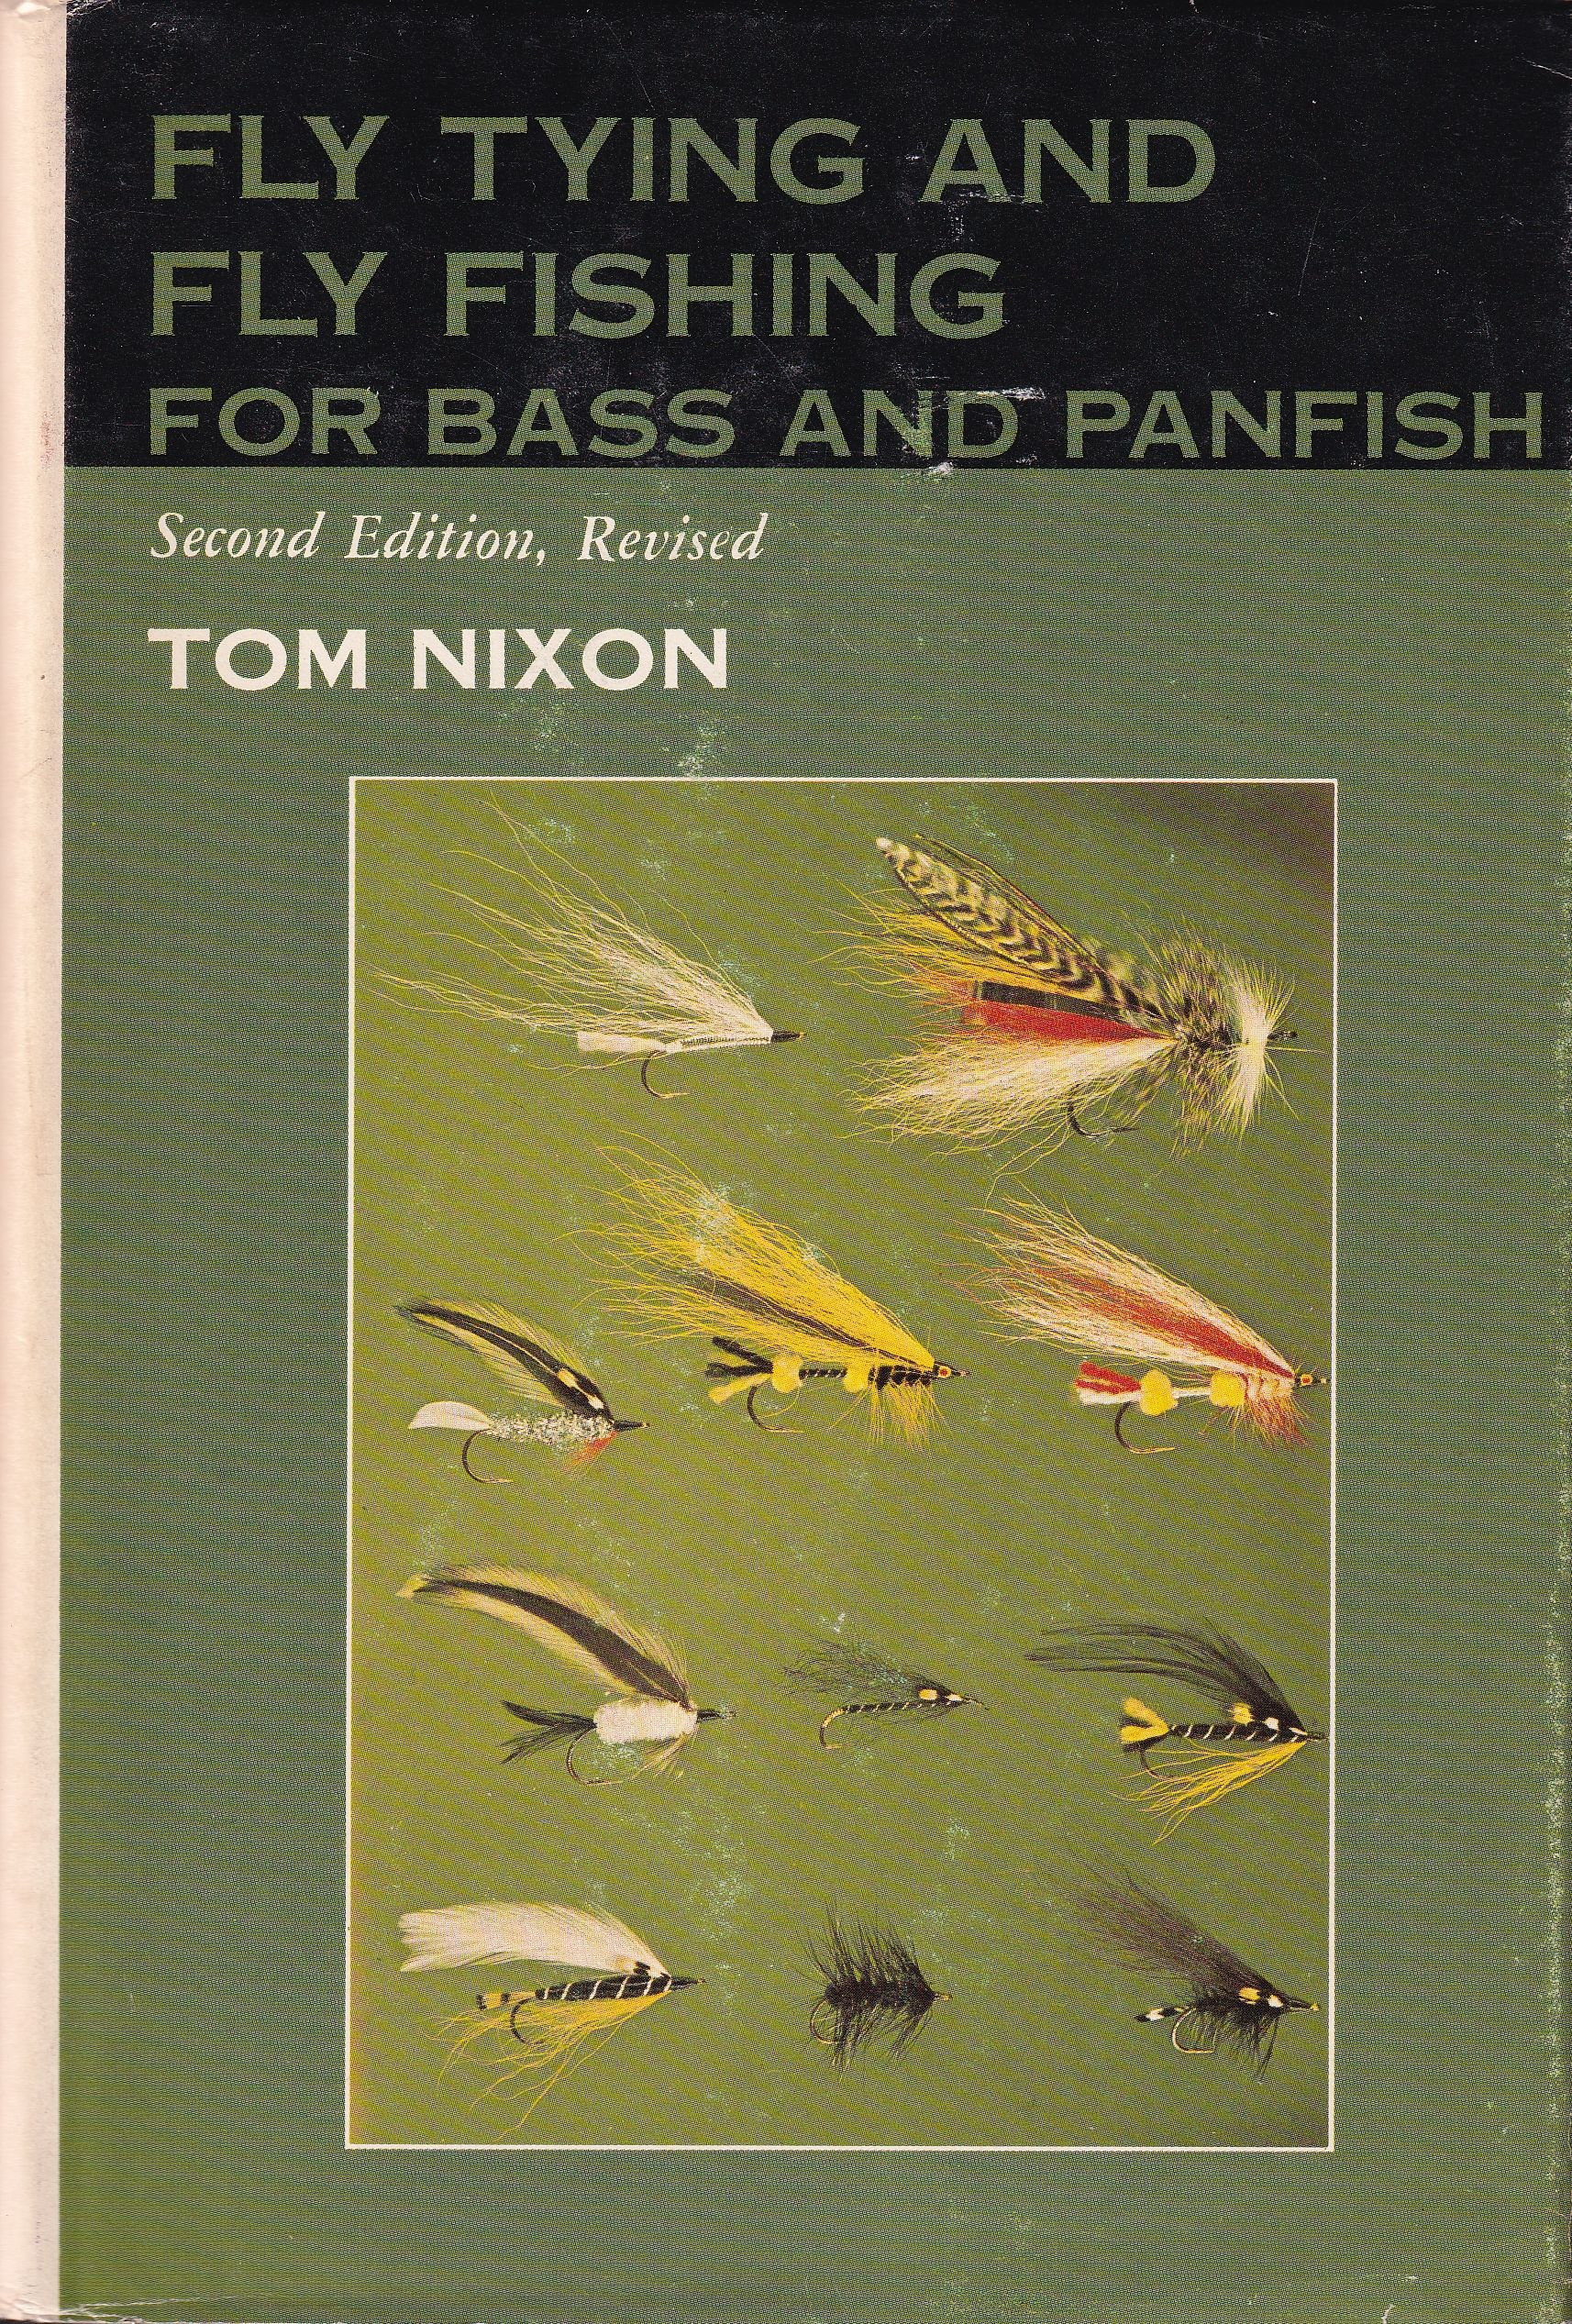 FLY TYING AND FLY FISHING FOR BASS AND